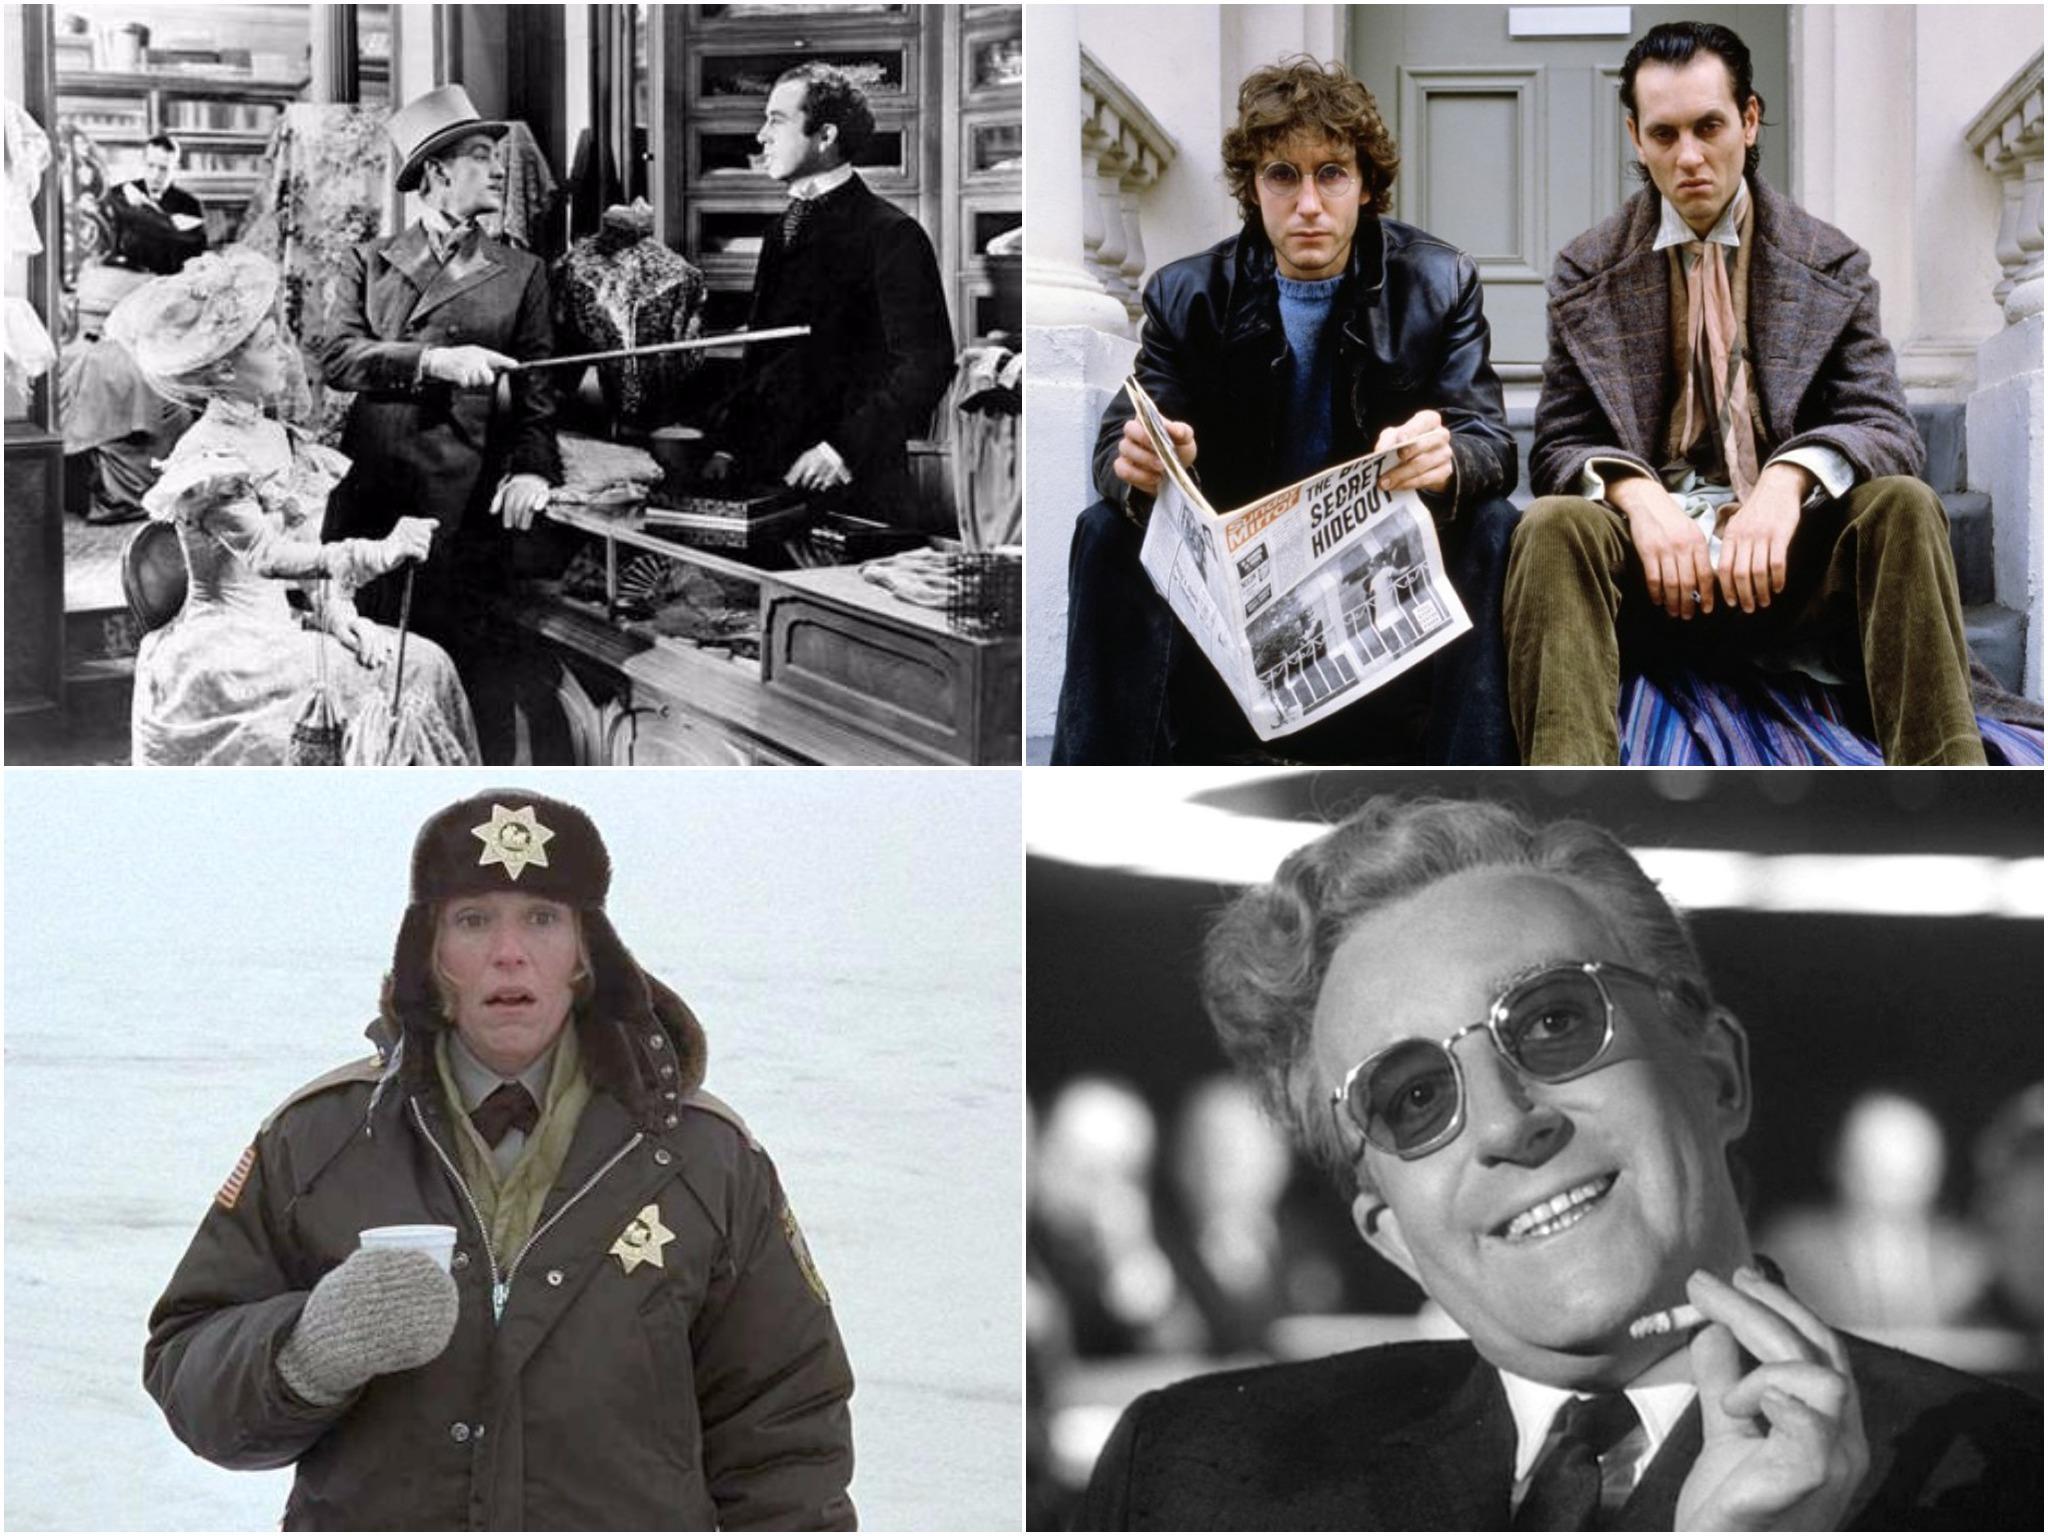 Clockwise from top right: Kind Hearts and Coronets, Withnail and I, Dr Strangelove, and Fargo